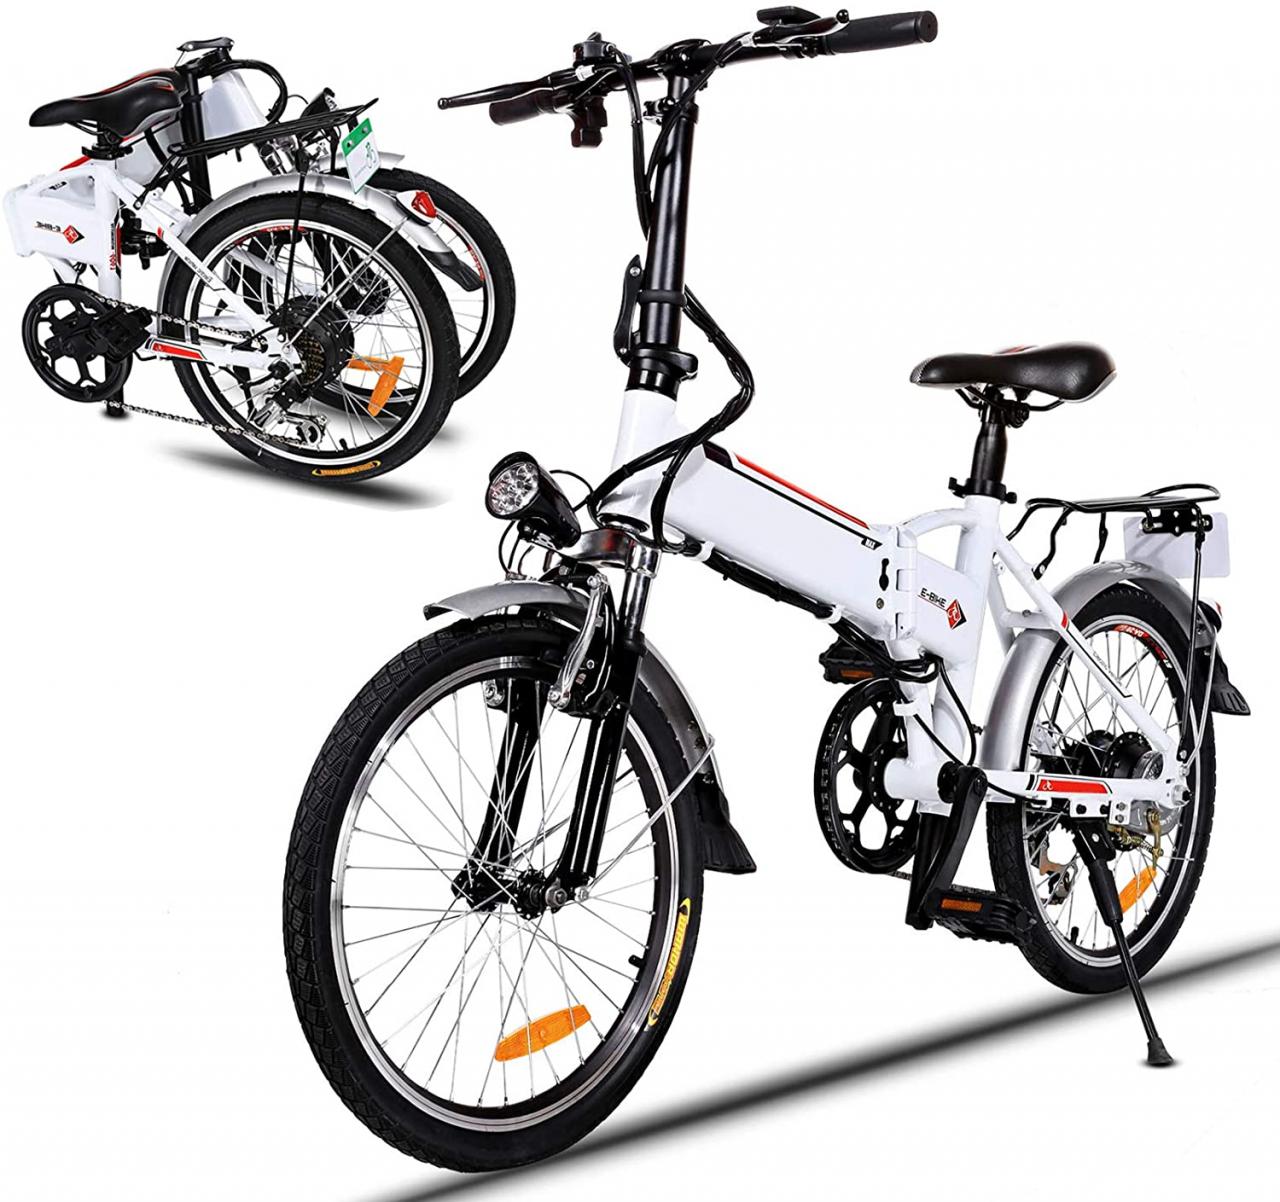 Bikes Bestlucky ZHY5207SY Electric Bike Kit Electric Bicycles